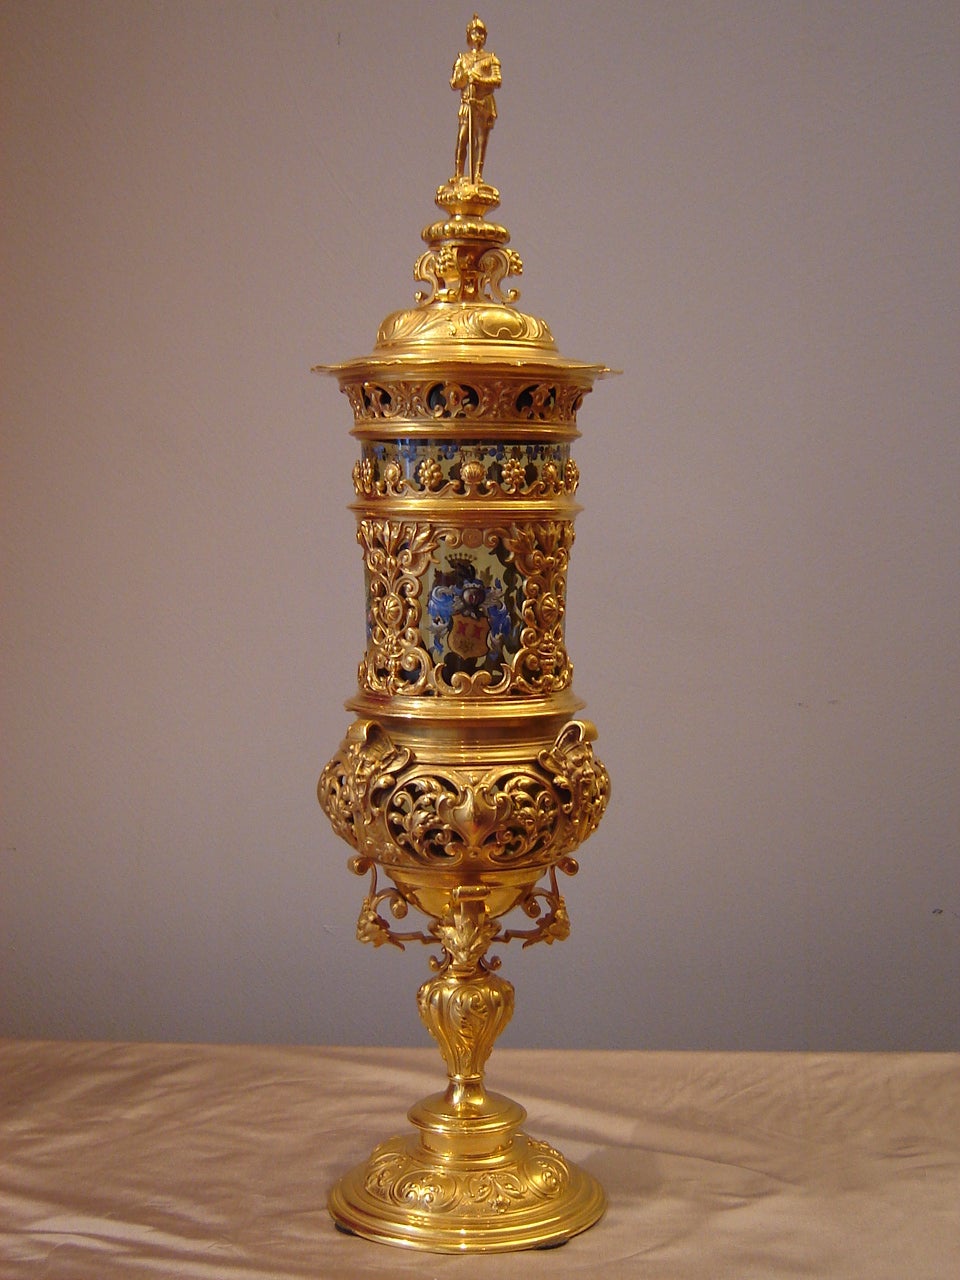 Exceptional pair of engraved and gilded bronze and painted glass lanterns, from Germanic countries and from the 19th century, composed of two parts, one including gilt bronze base, the container and the cap, and the other adopting the form of a